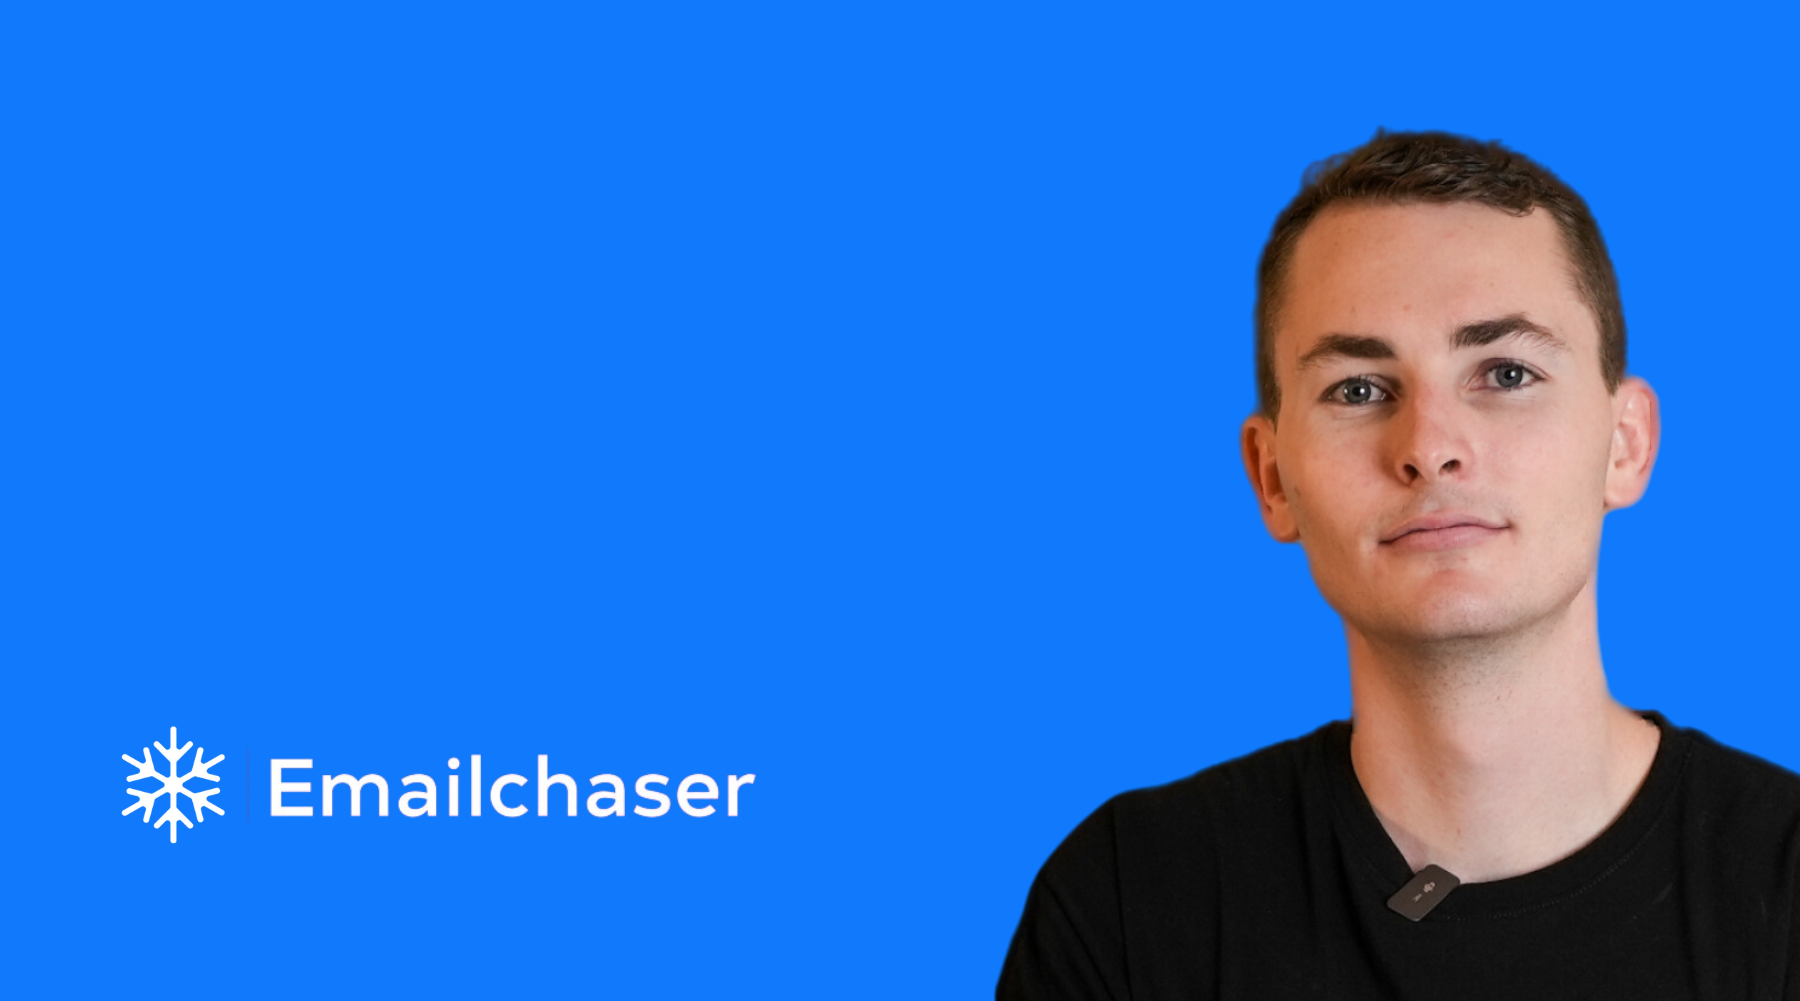 Emailchaser: The Future of Sending Cold Emails